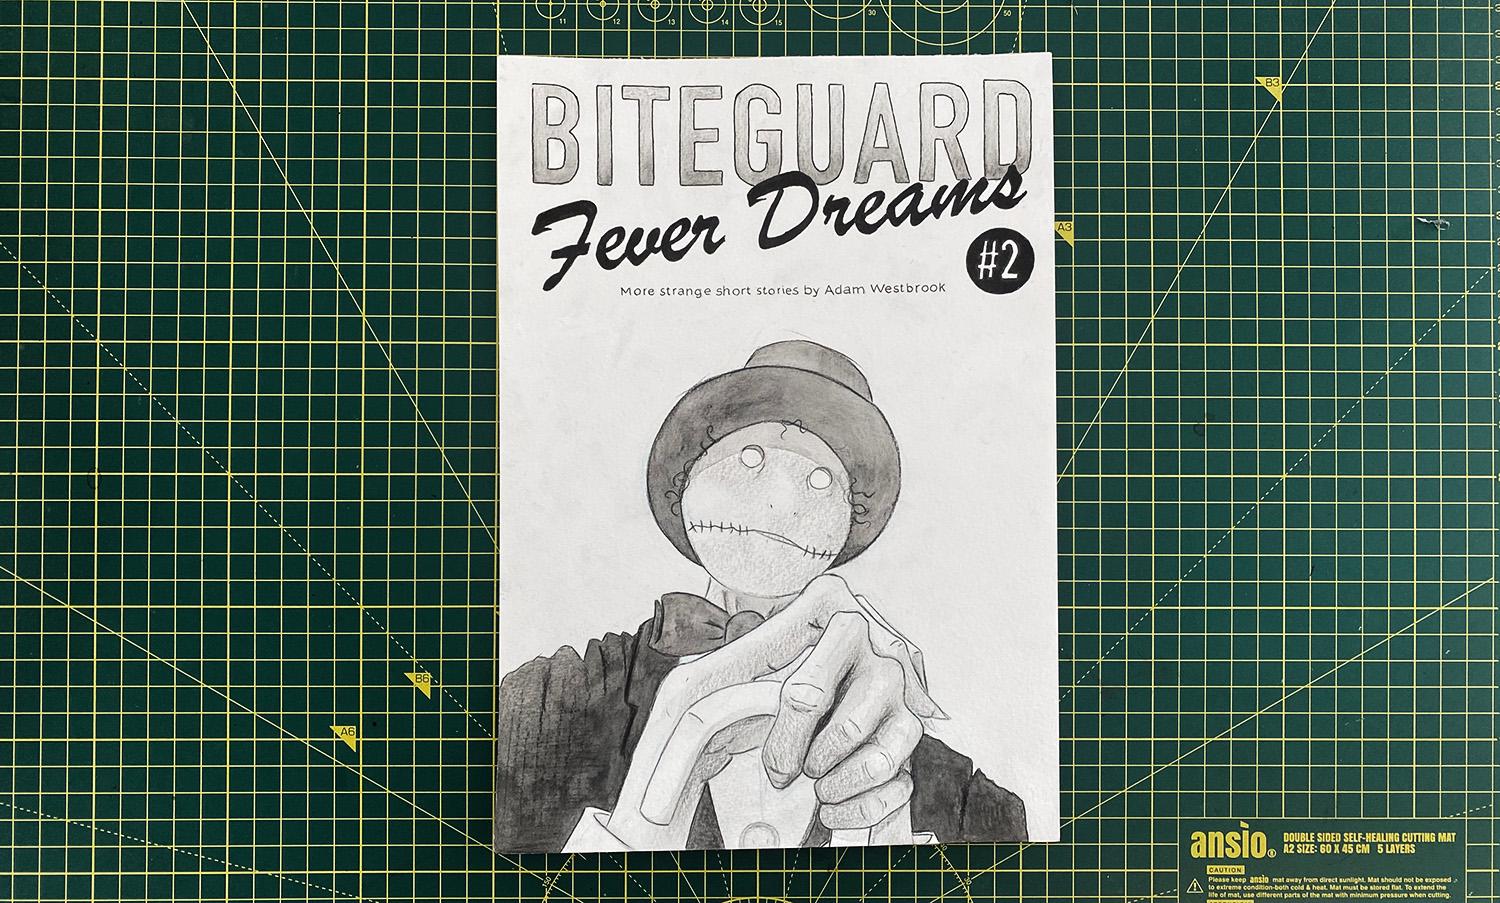 A photograph of the front cover of Biteguard Fever Dreams Issue 2 by Adam Westbrook